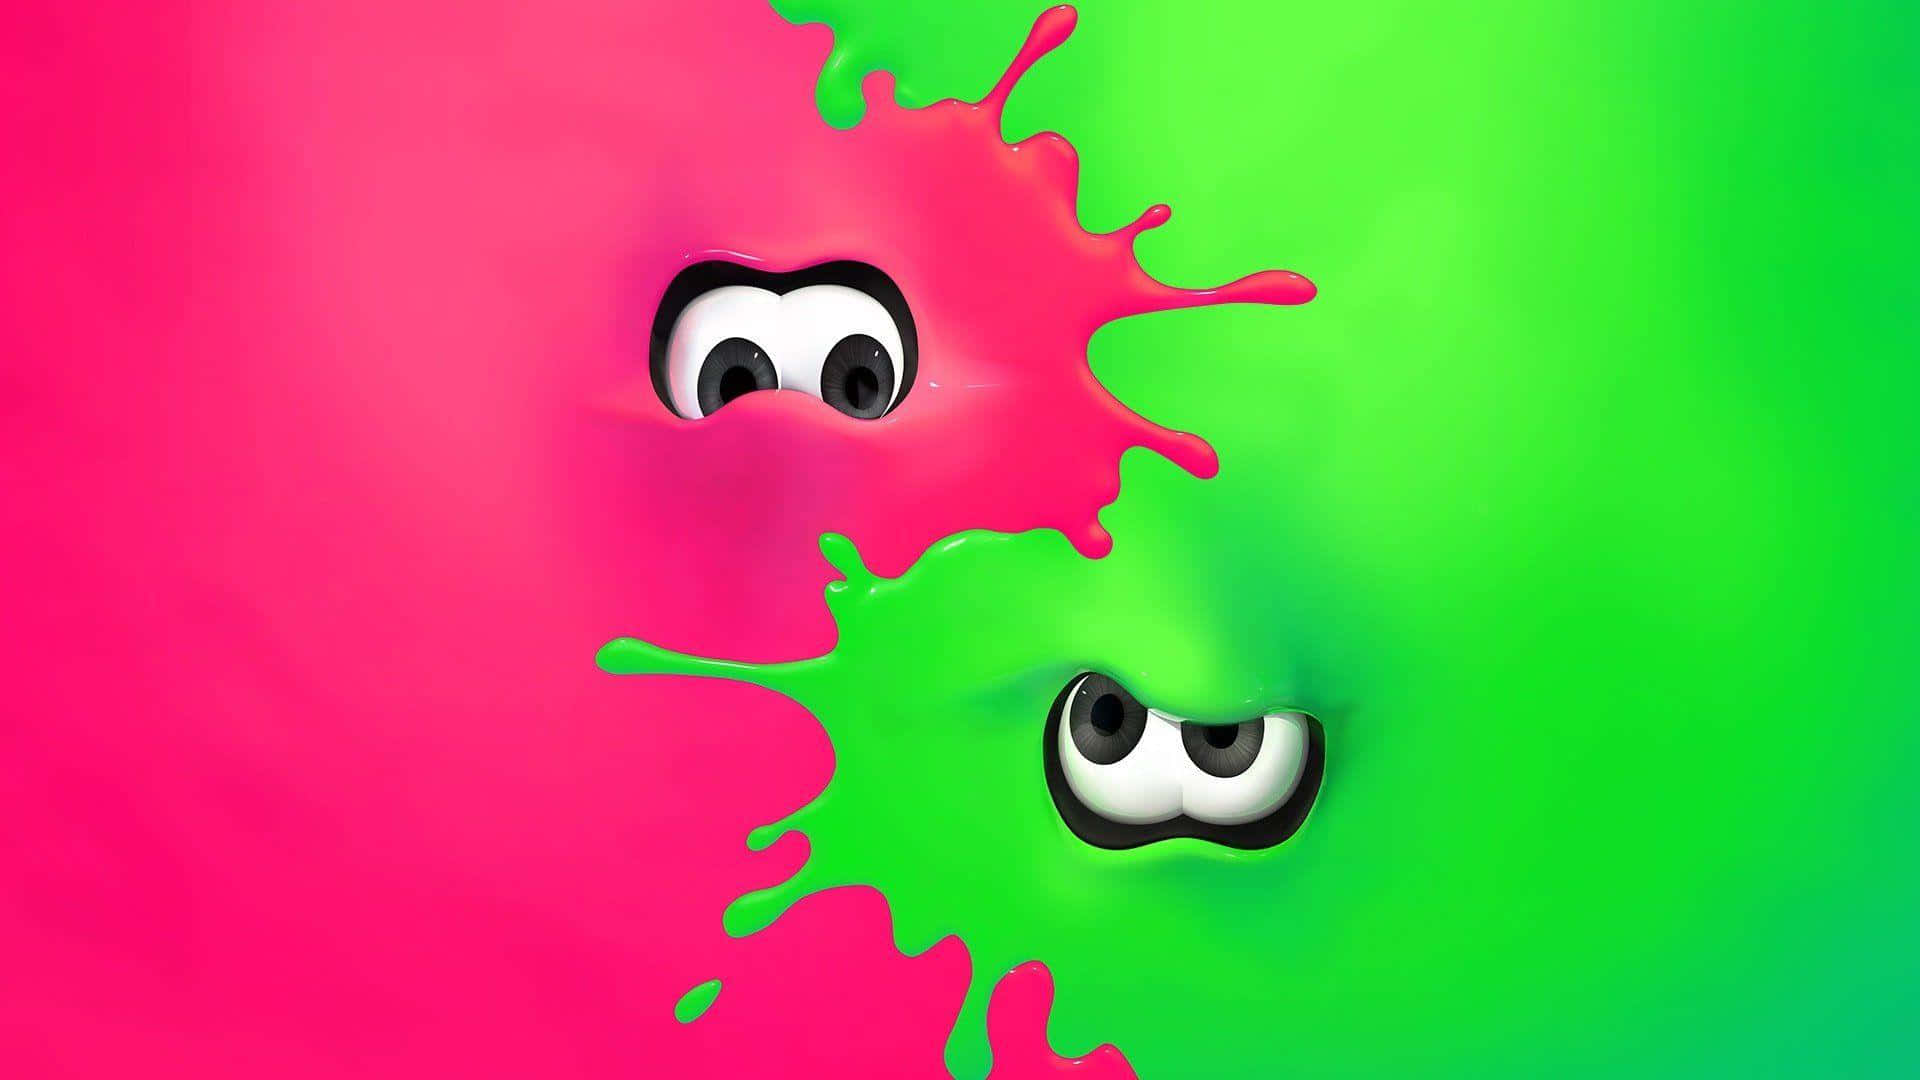 Splat the competition with Splatoon!